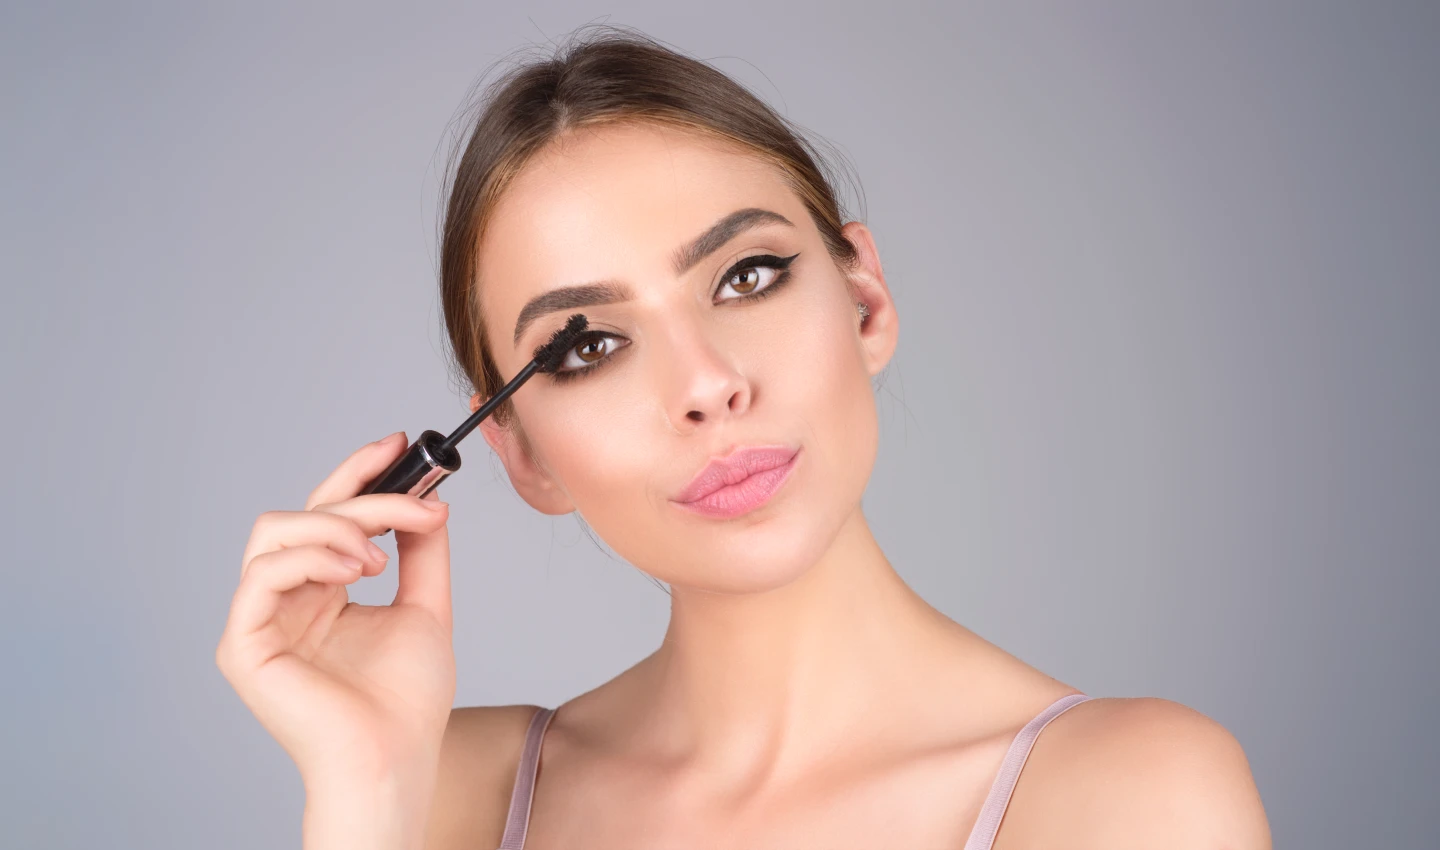 : A woman wearing lengthening mascara that gives her extraordinary lash length, creating dramatic eyes.